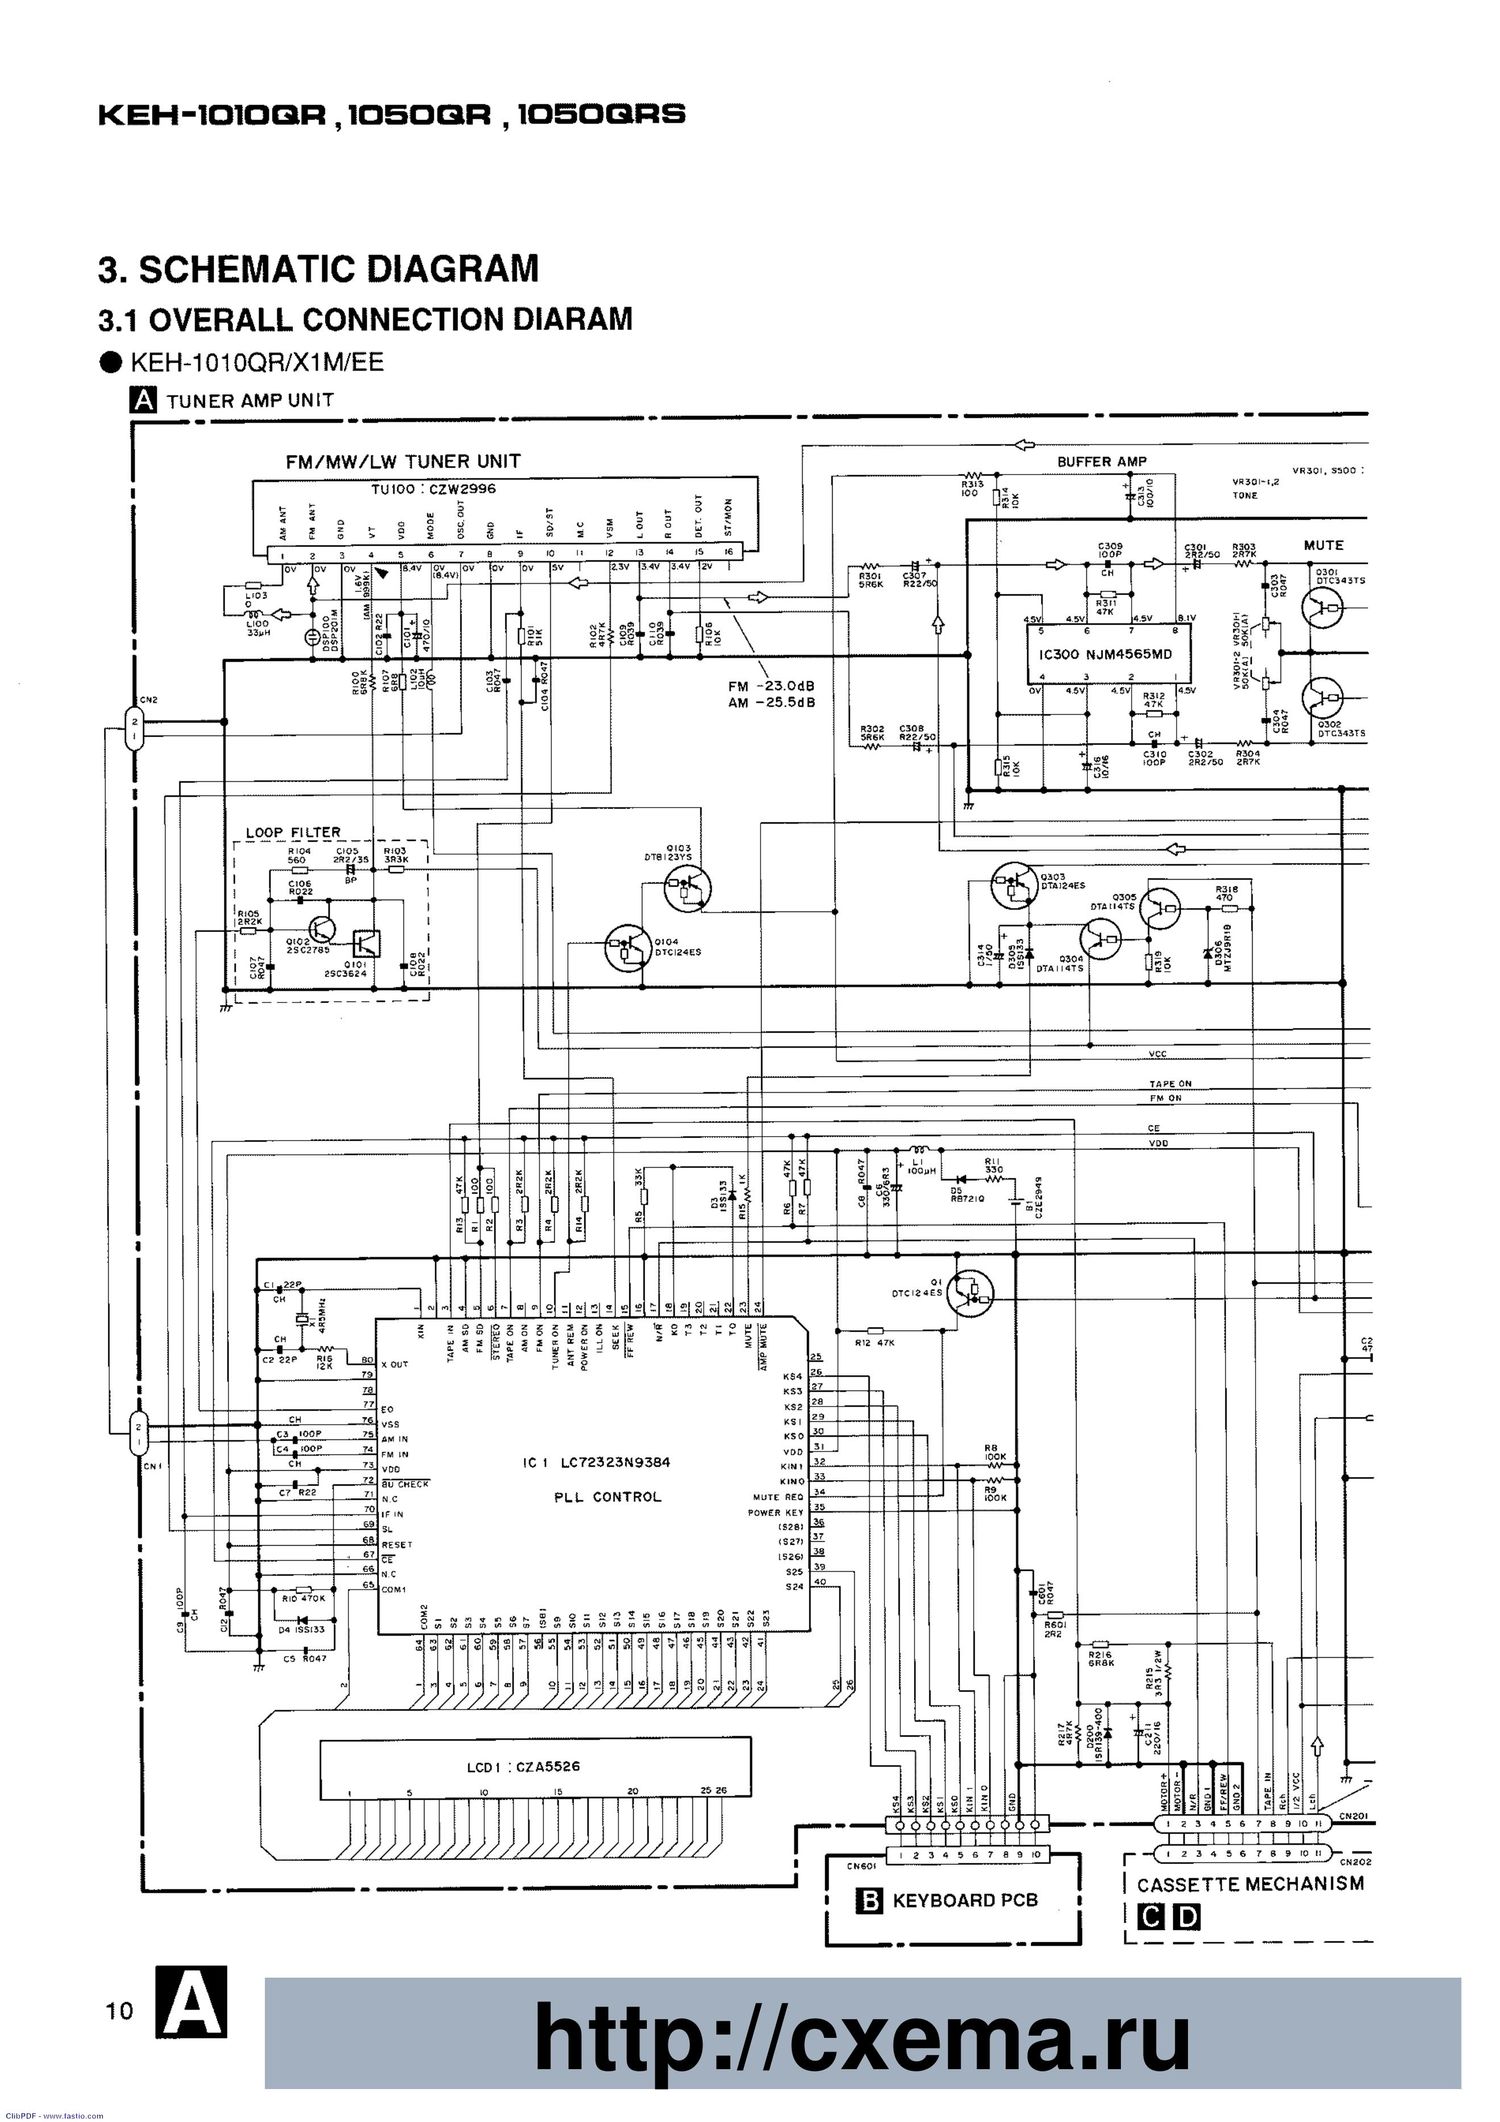 pioneer keh 1050 qrs schematic